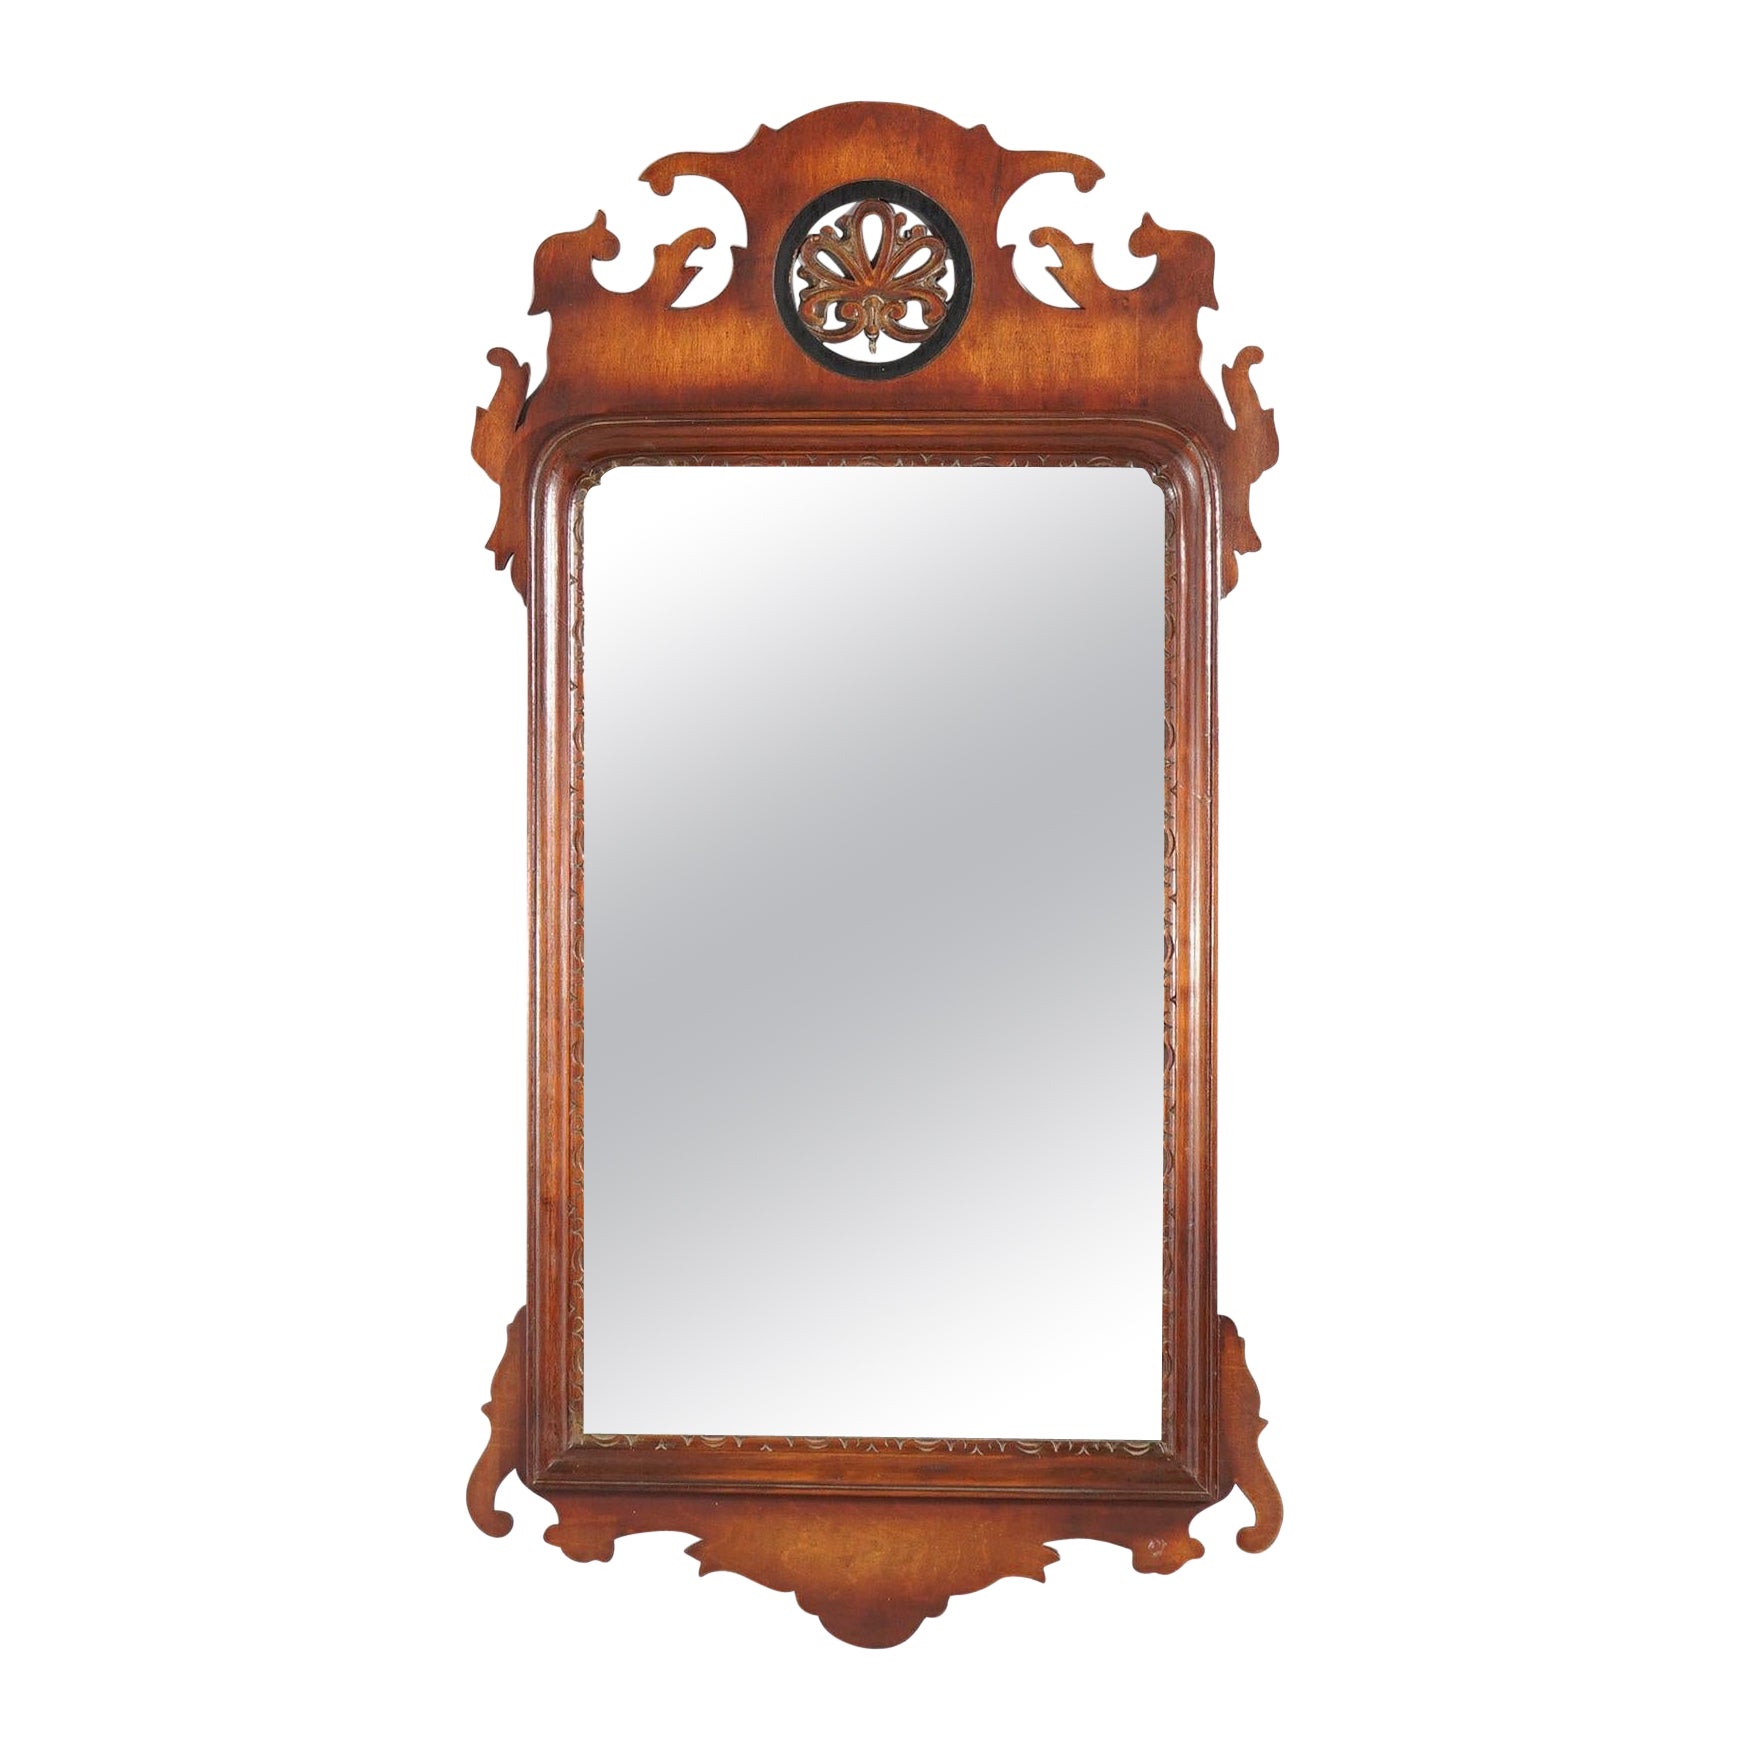 Chippendale Style Mahogany & Ebonized Cut-Out Wall Mirror by Simonds, c1940